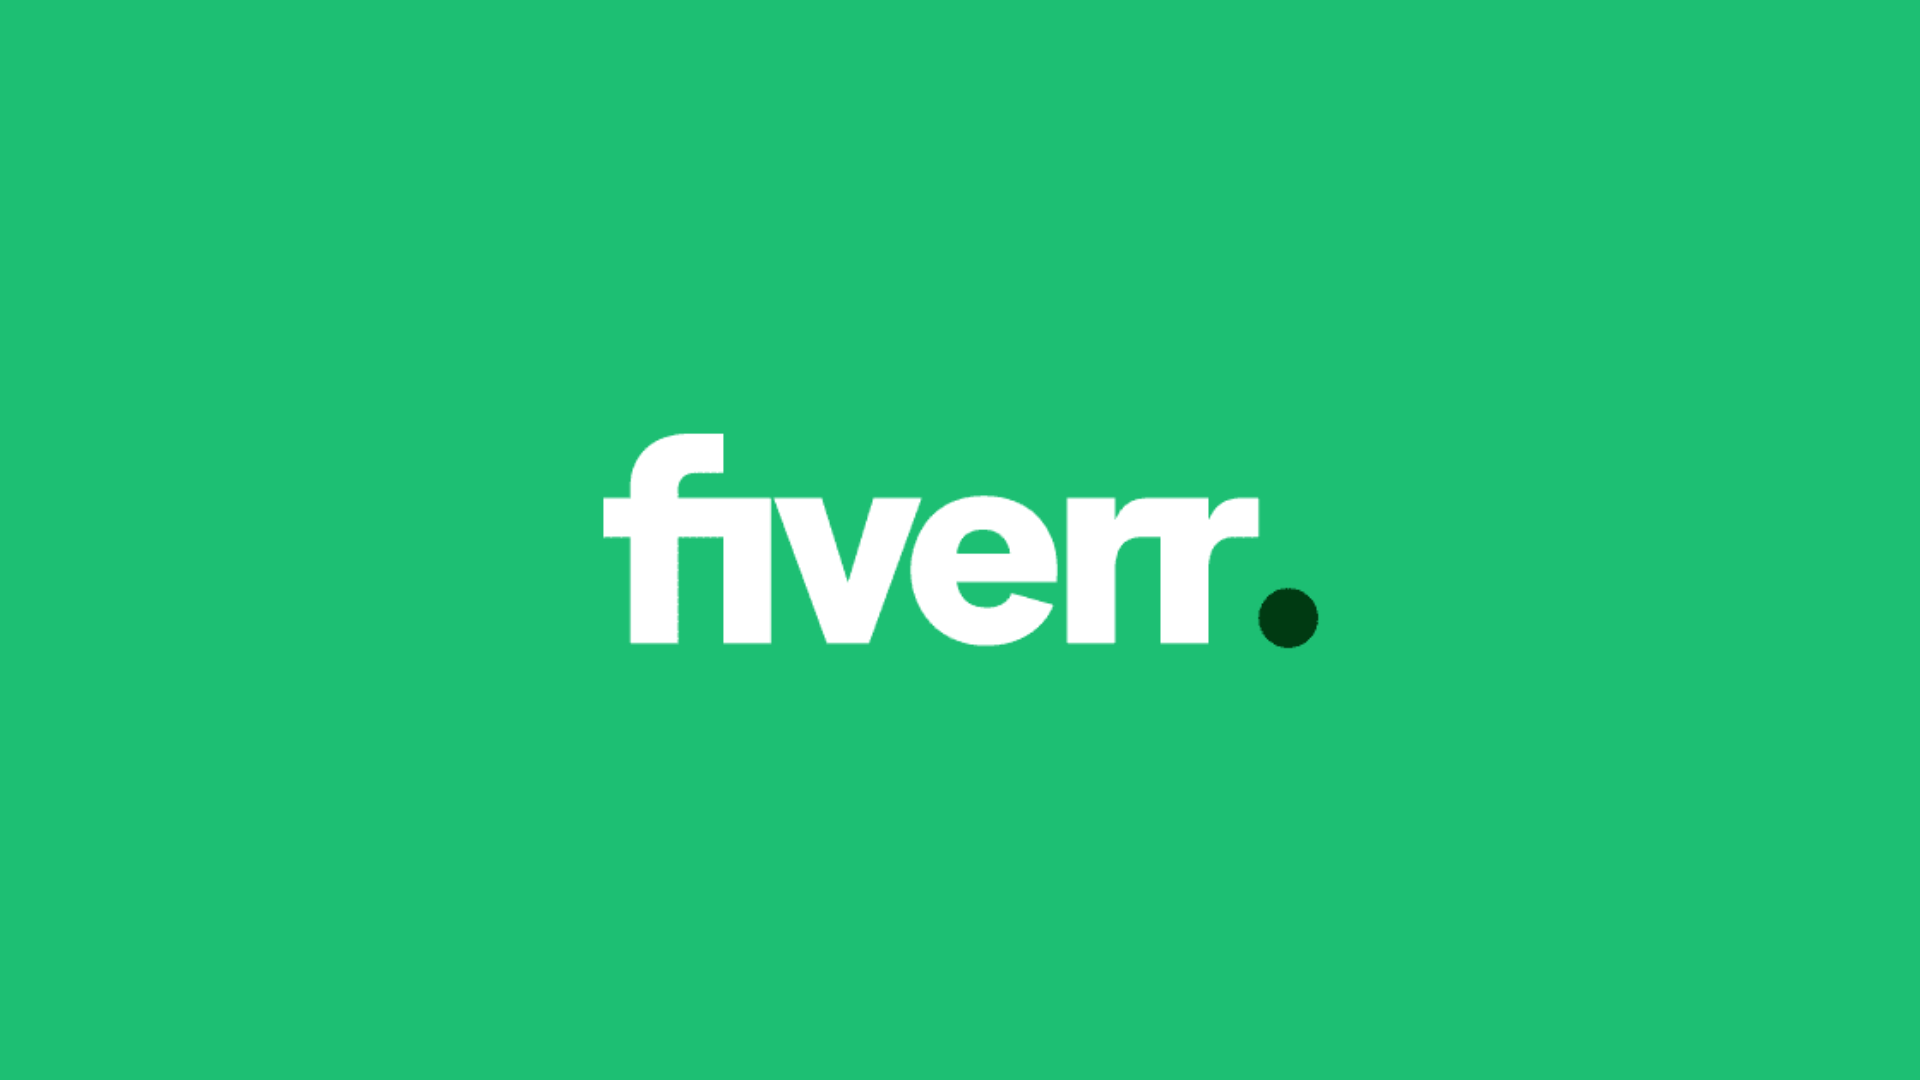 First order on fiverr